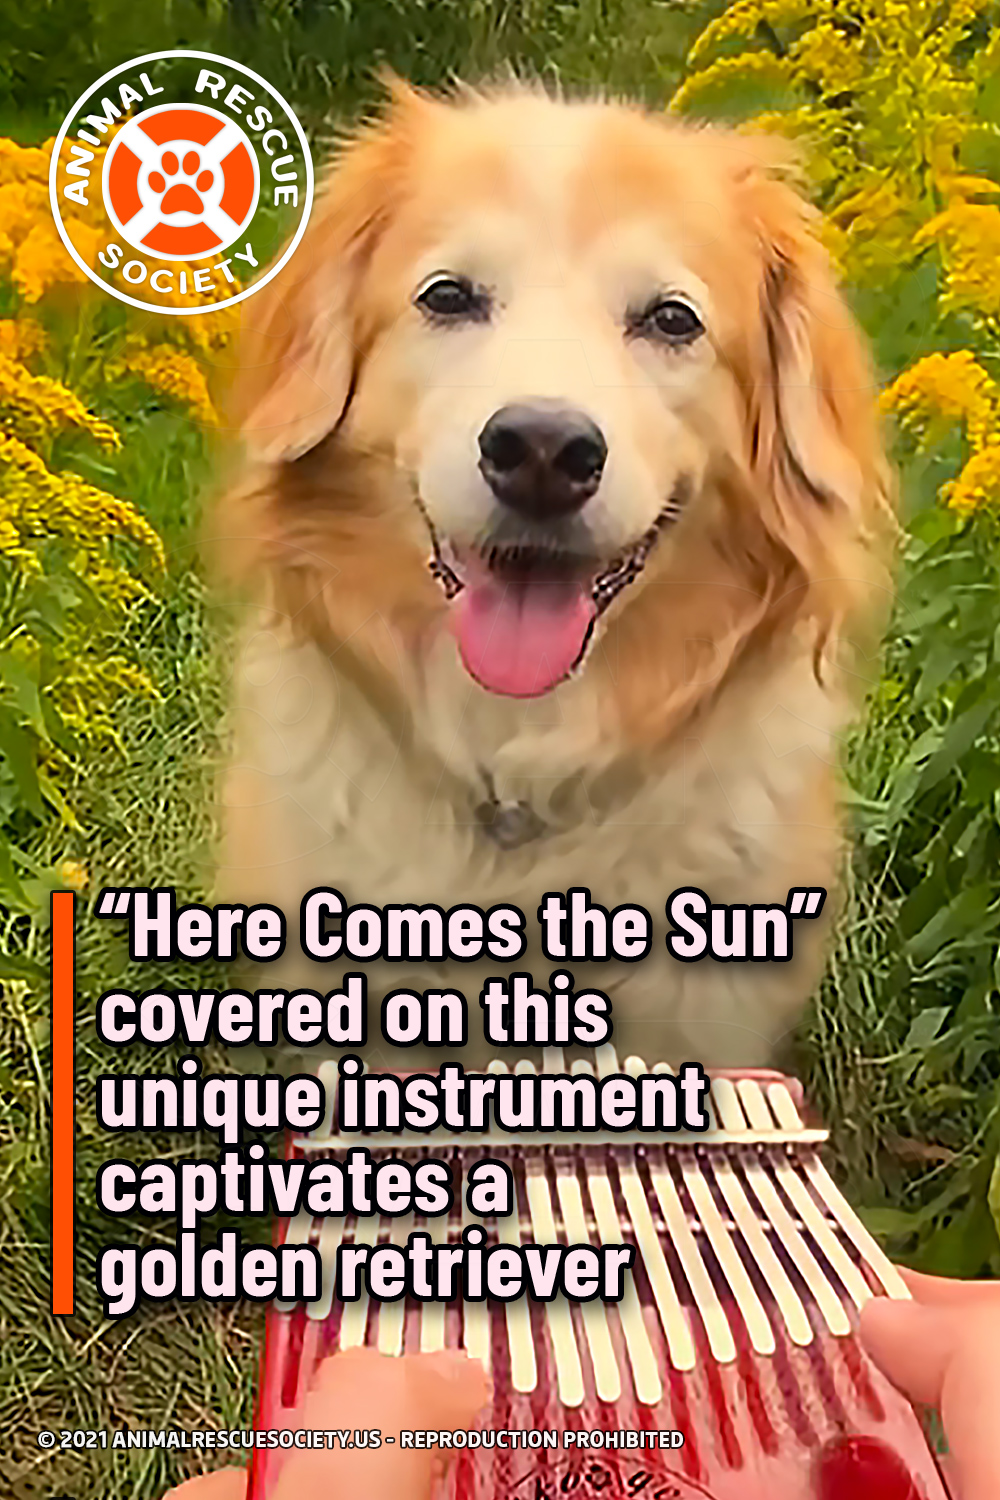 “Here Comes the Sun” covered on this unique instrument captivates a golden retriever